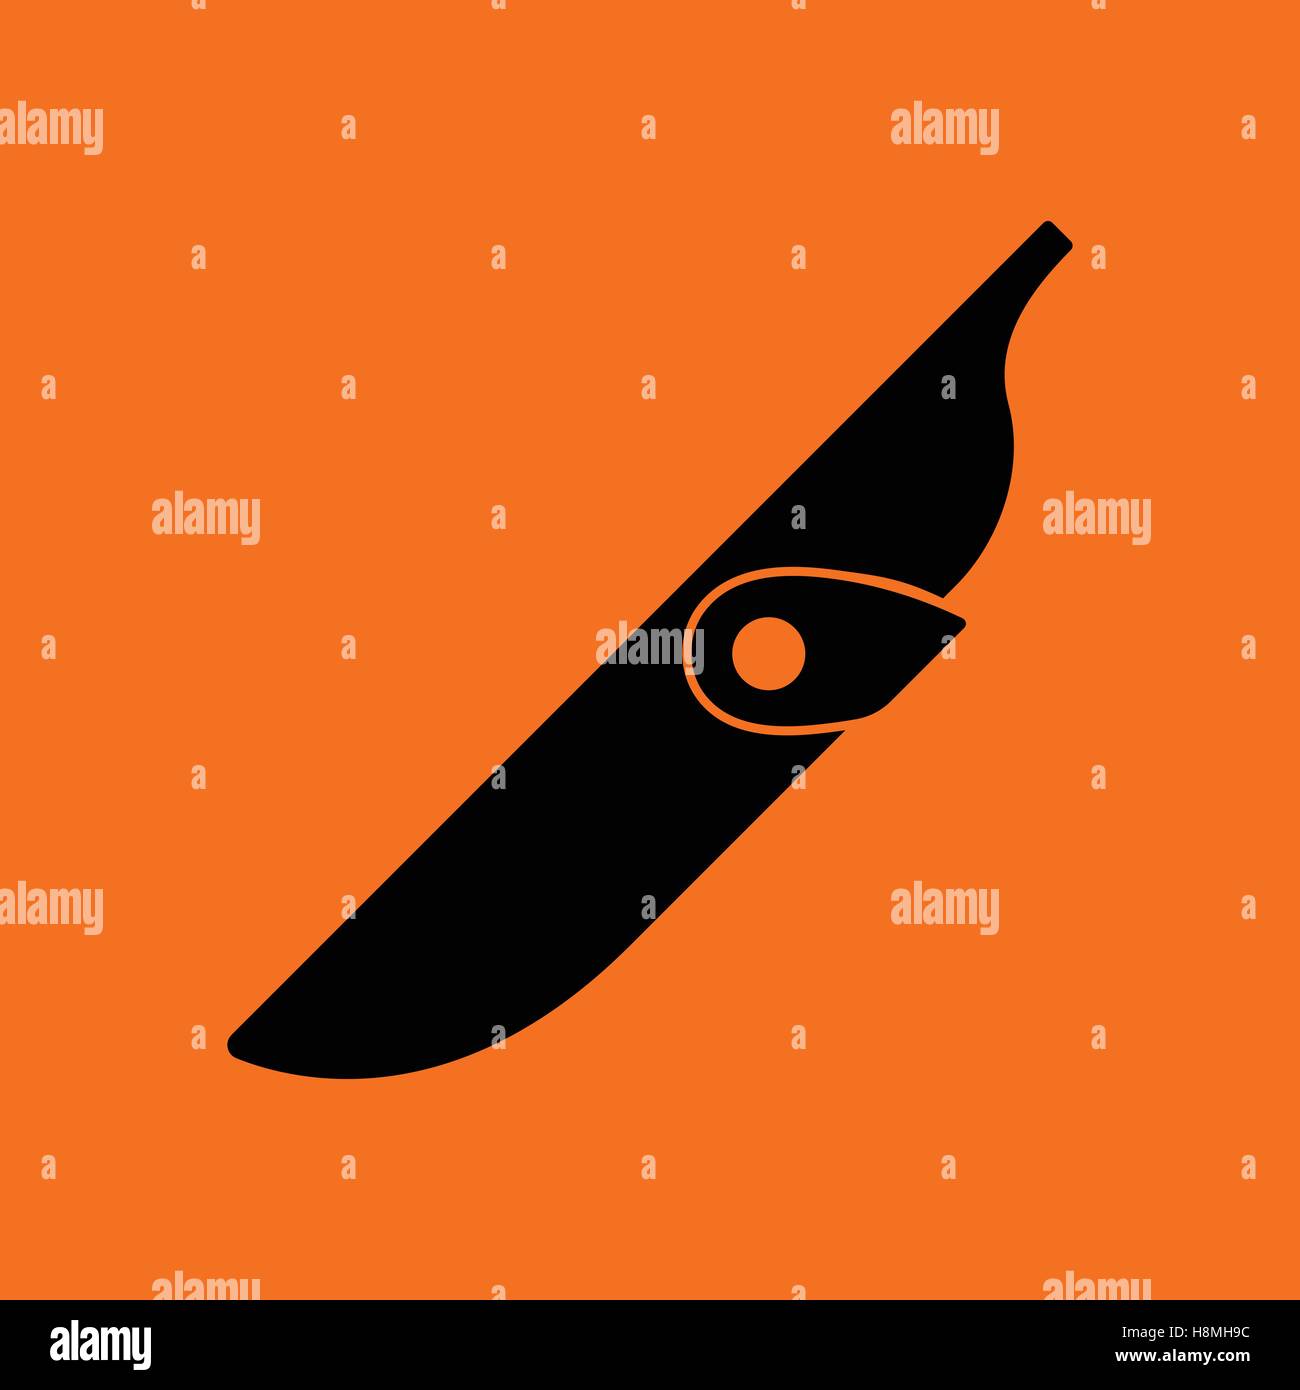 Knife scabbard icon. Orange background with black. Vector illustration. Stock Vector